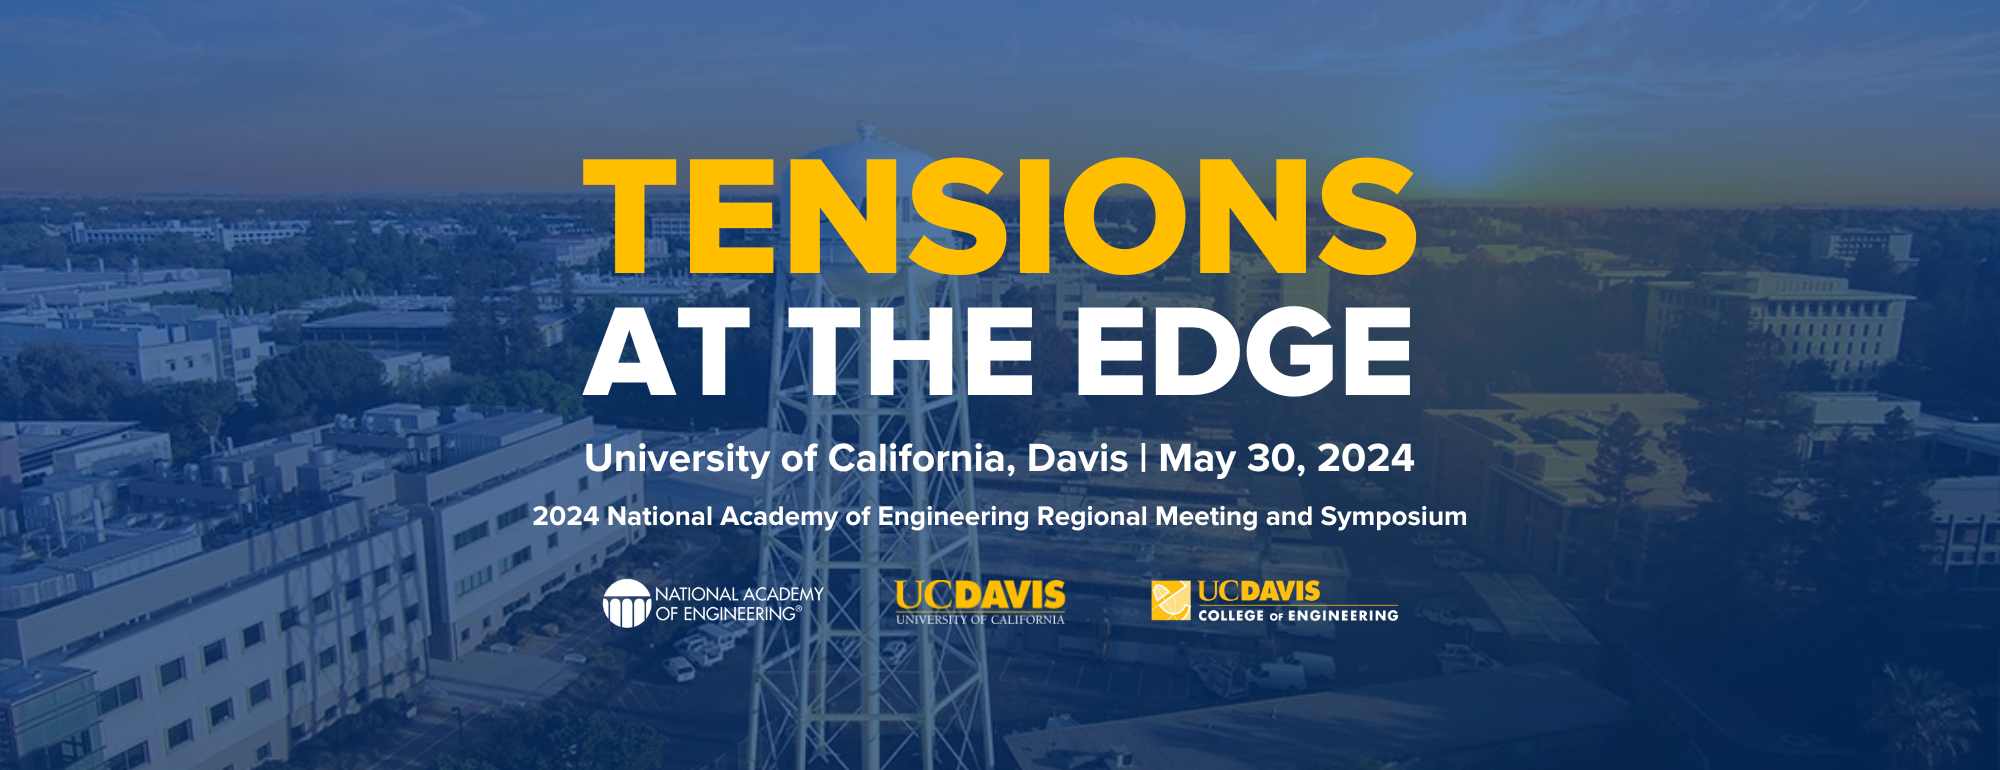 Tensions at the Edge UC Dais May 30, 2024 National Academy of Engineering Regional Meeting